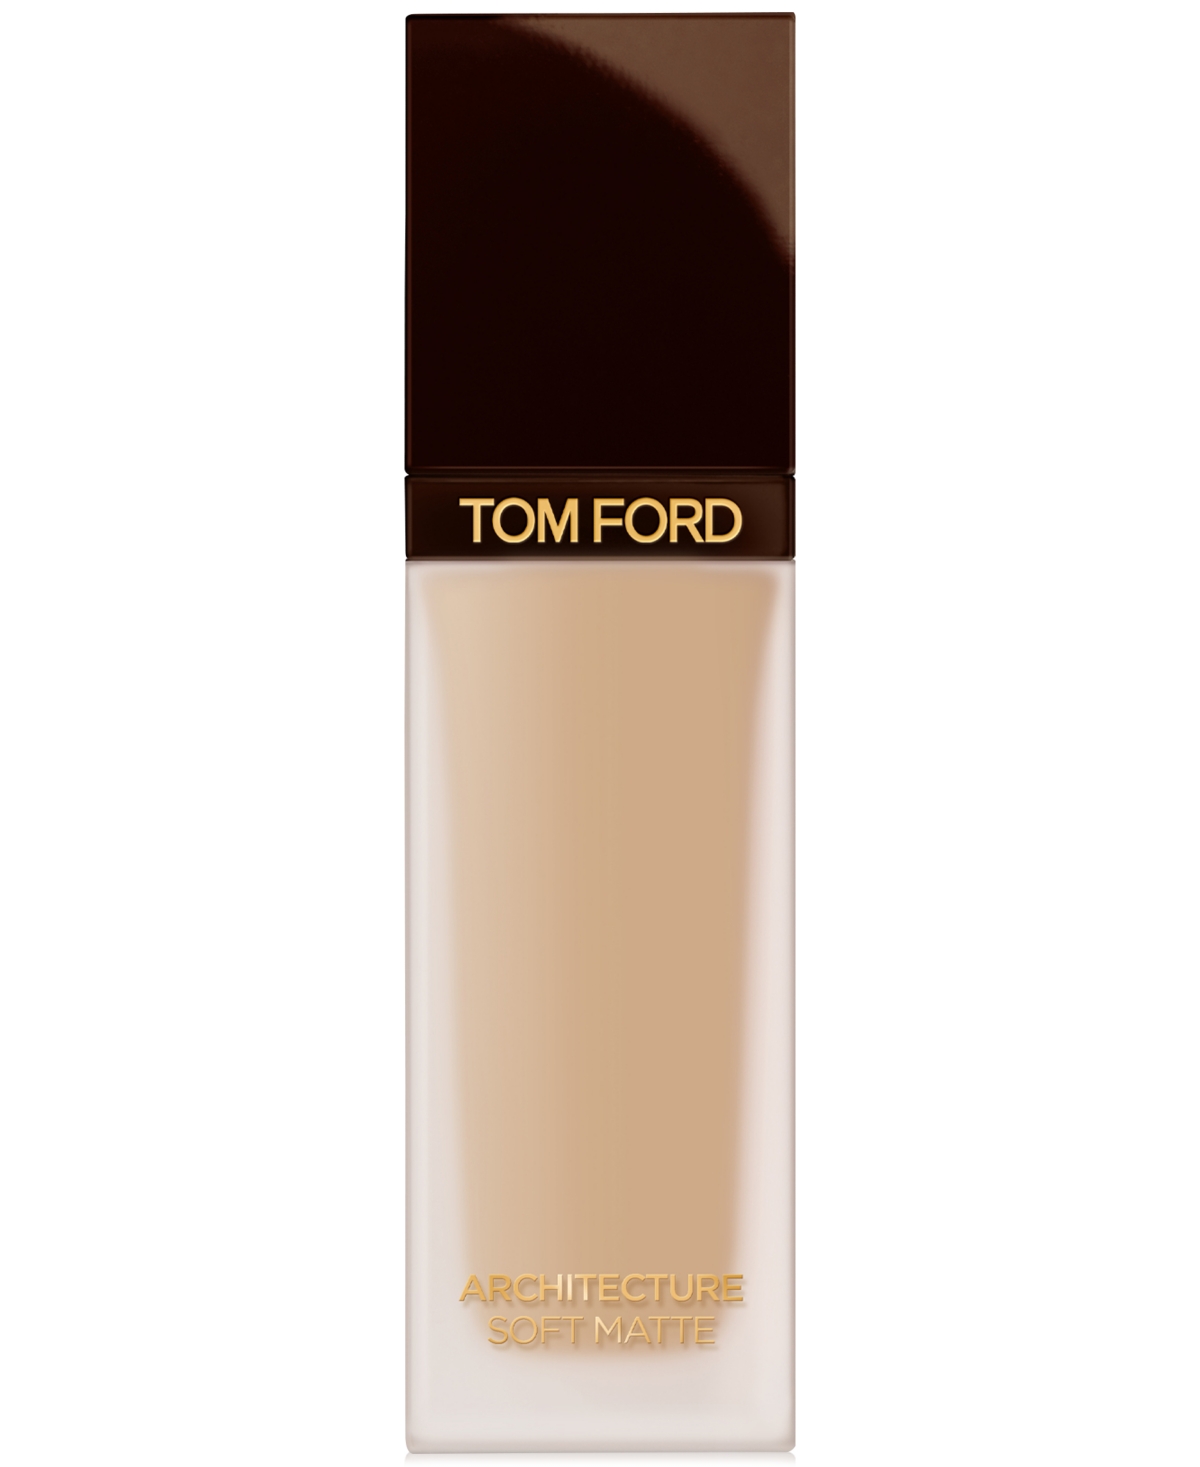 Shop Tom Ford Architecture Soft Matte Blurring Foundation In . Fawn - Light Medium